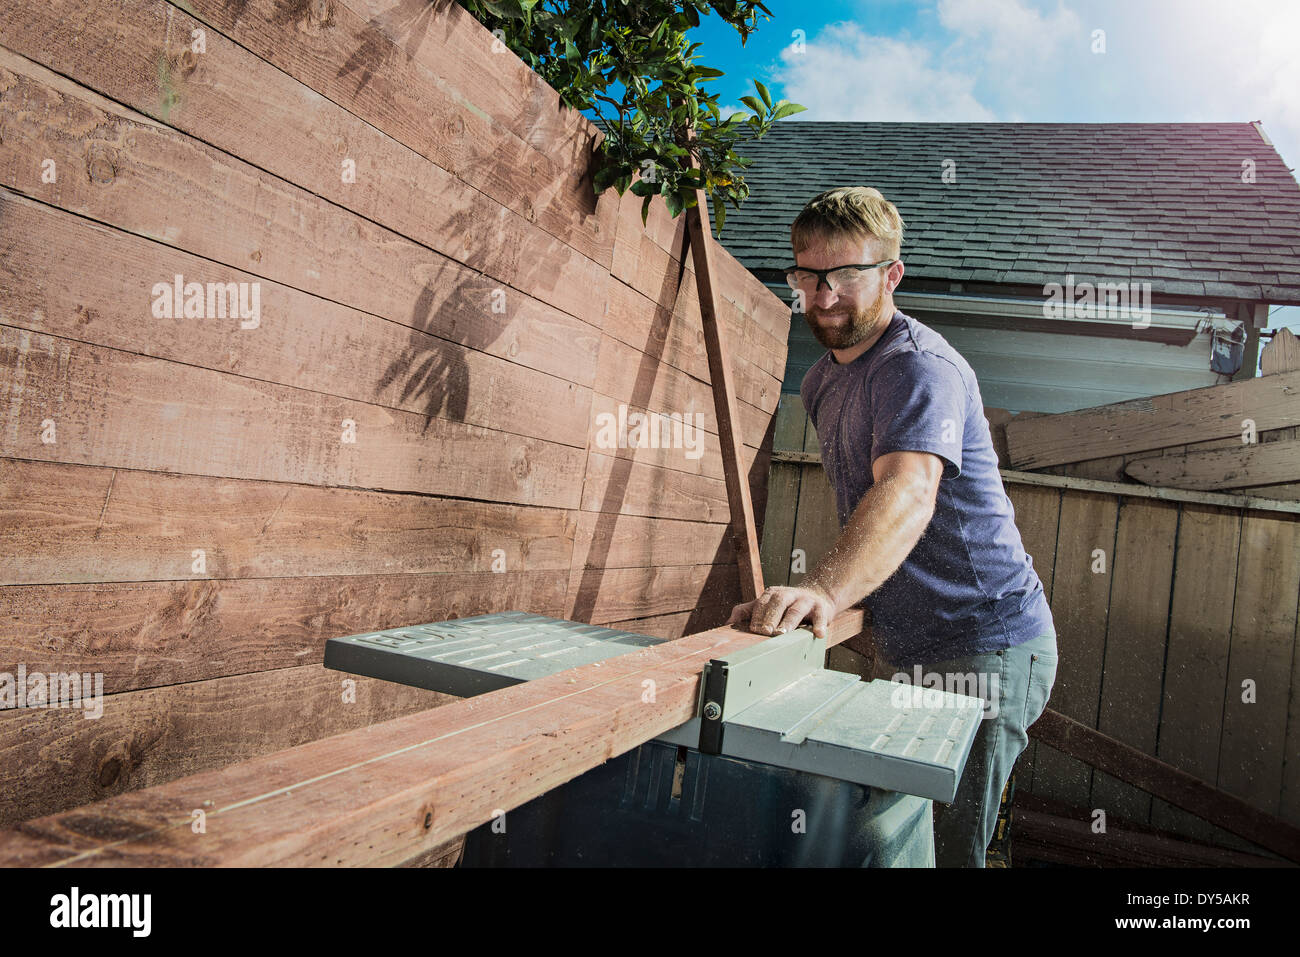 Joiner in backyard measuring planks of wood on workbench Stock Photo